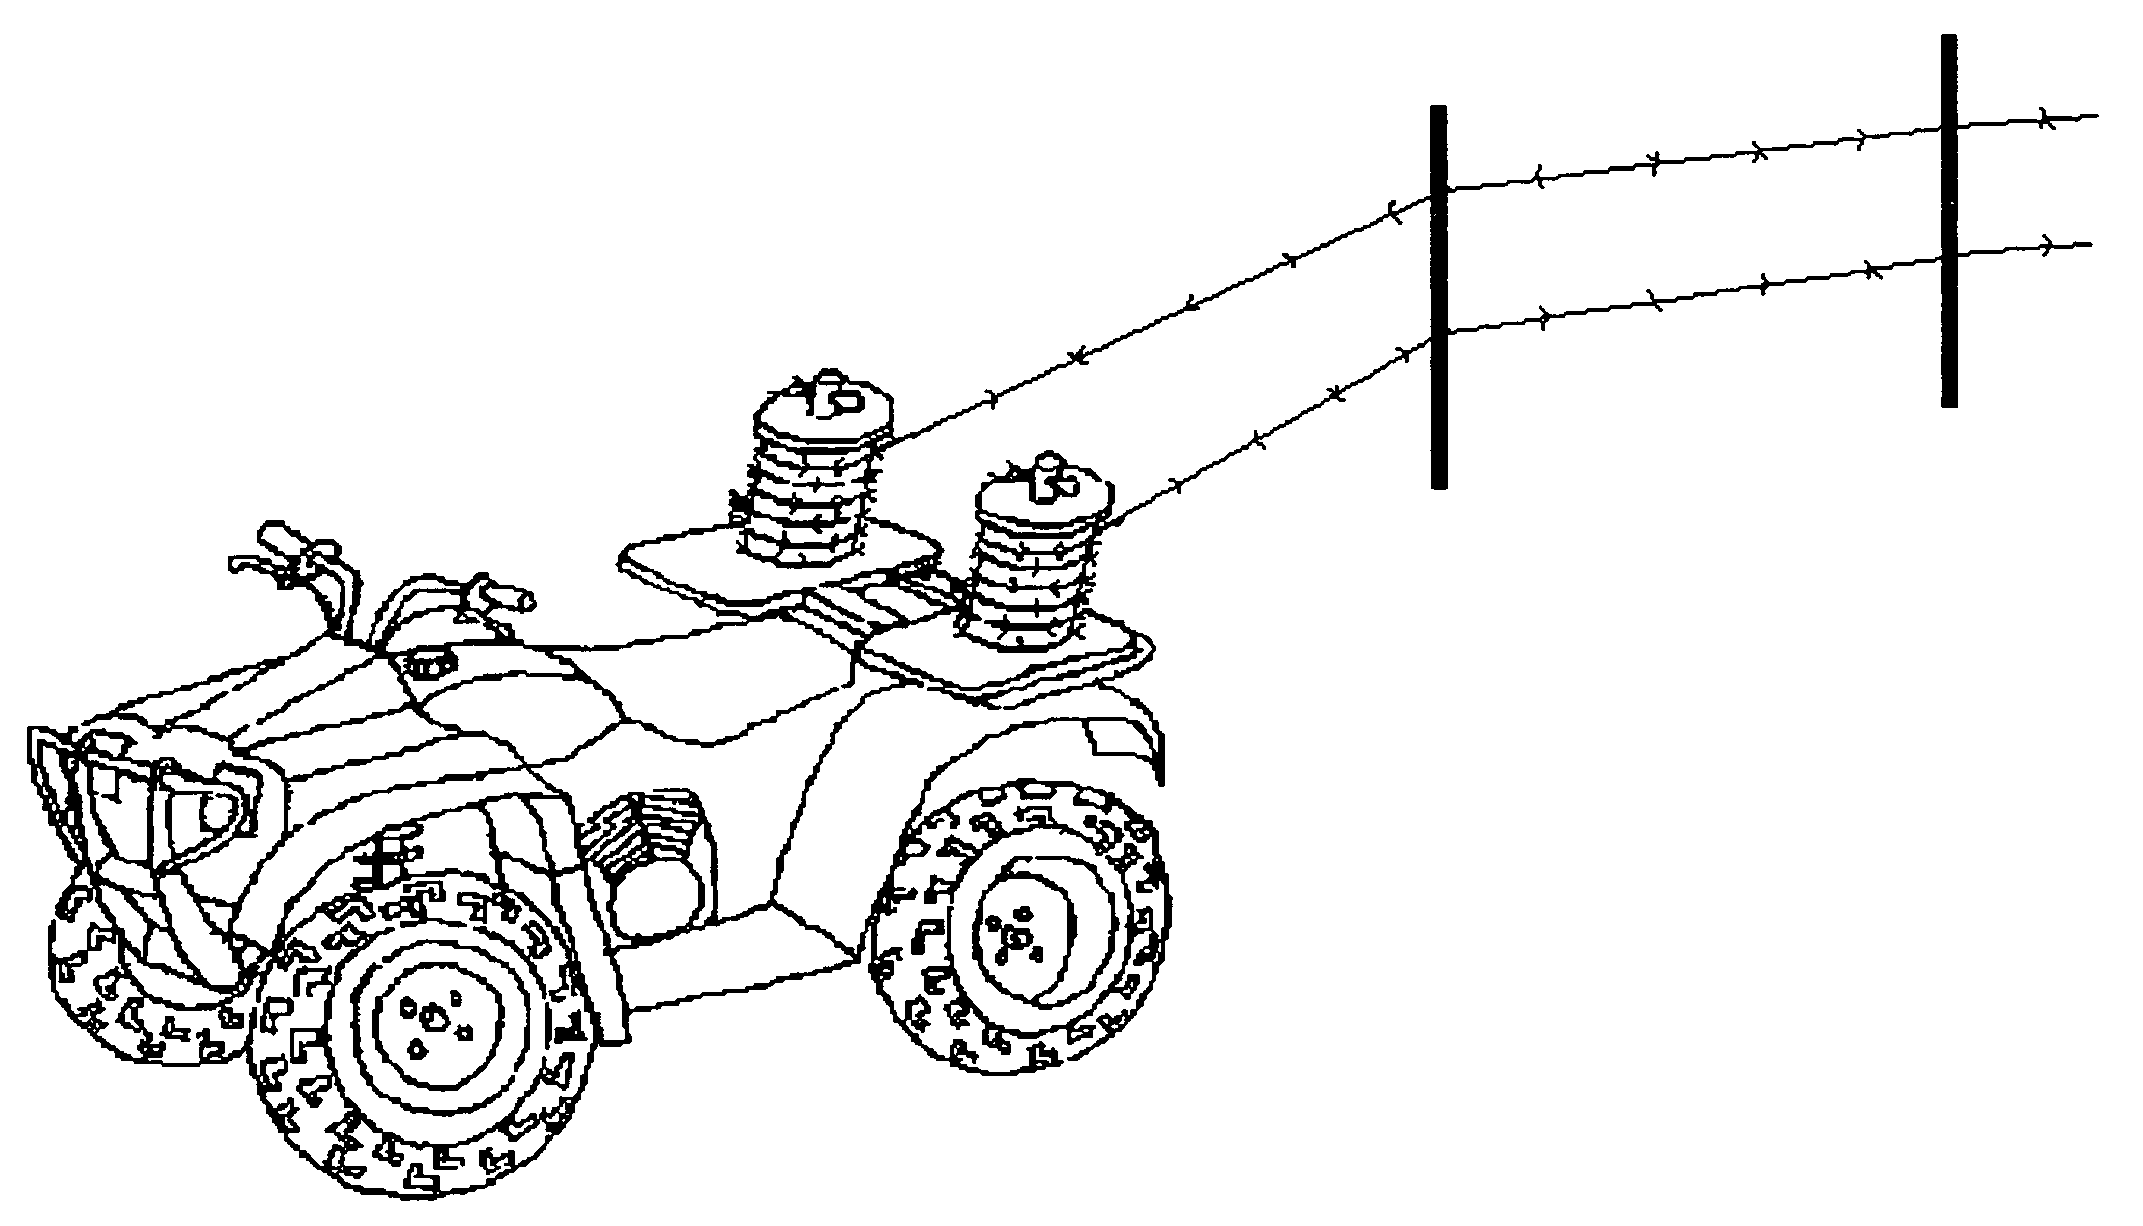 Barbed wire installing system using all terrain vehicle (ATV)